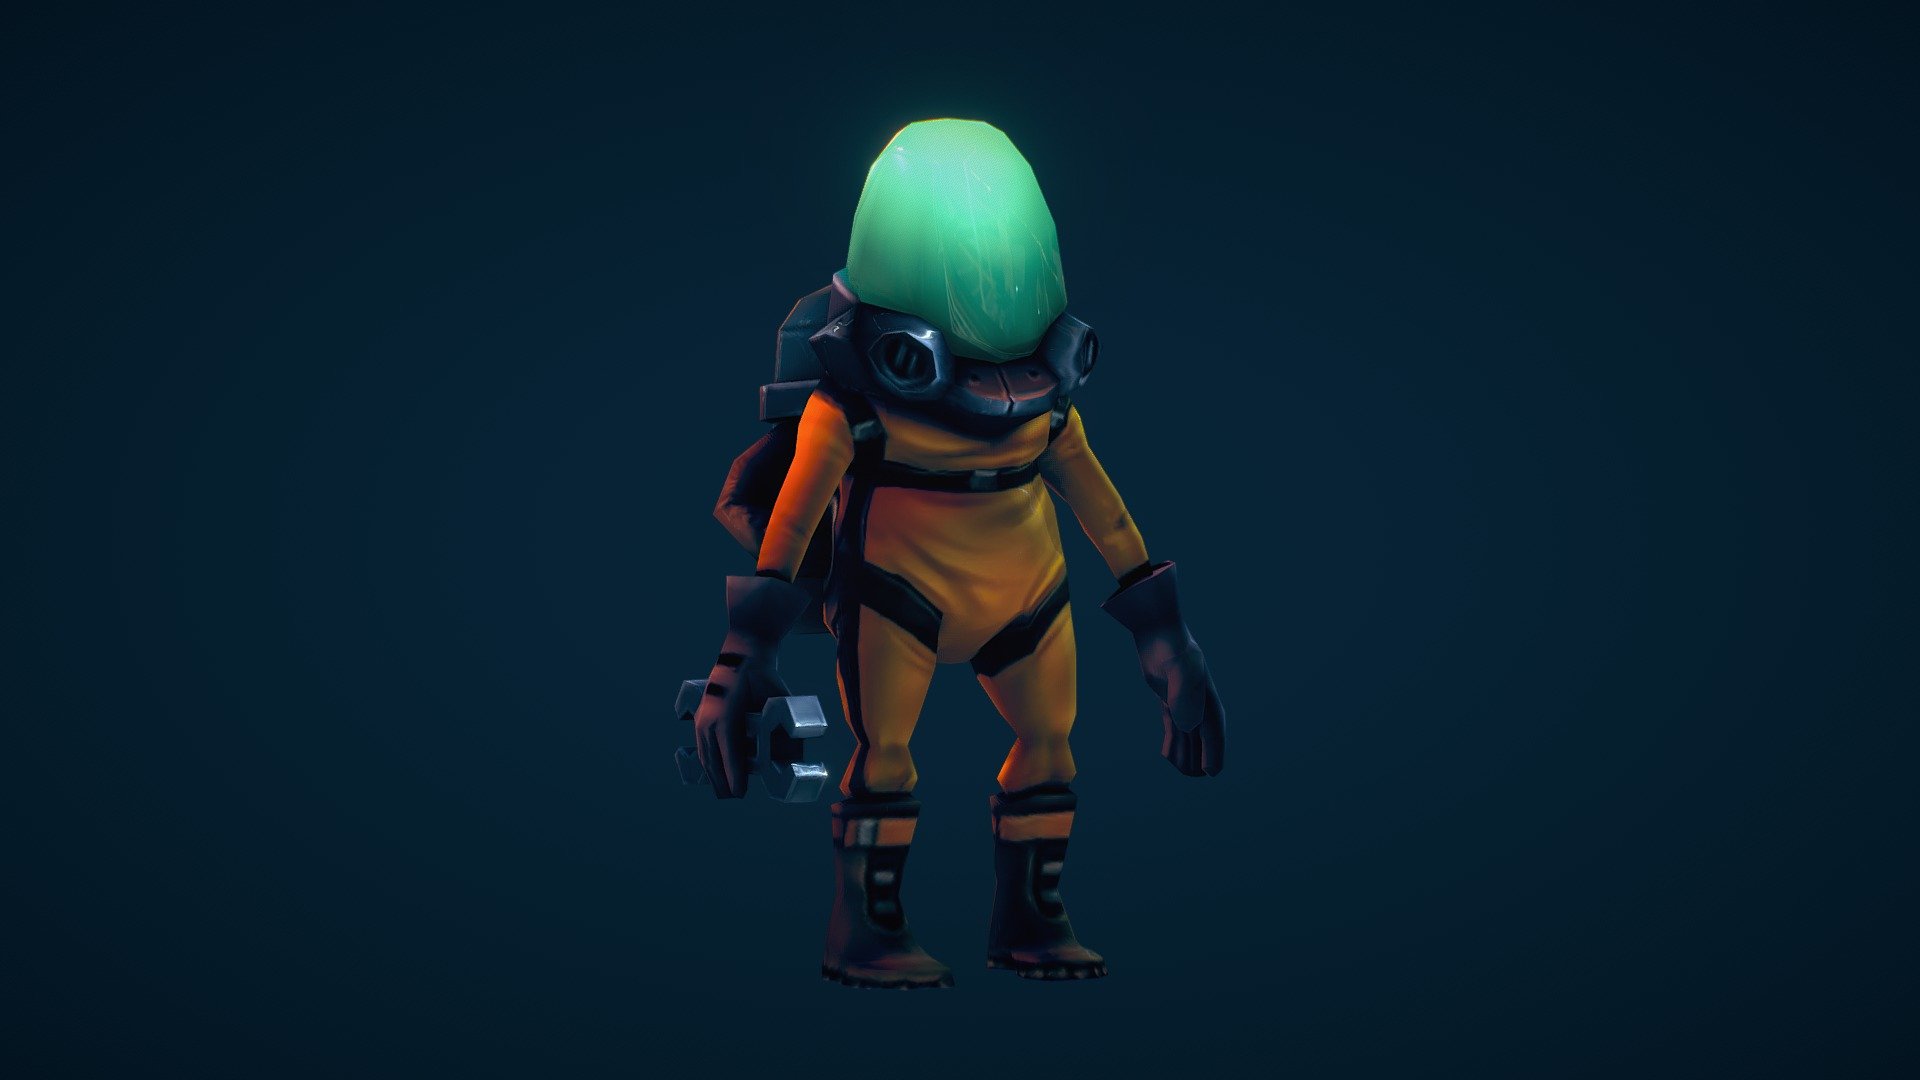 A project im working on involving space exploration with small characters. this one is not meant for too much of a closeup but think it has enough details. Made in Maya and 3dCoat 3d model